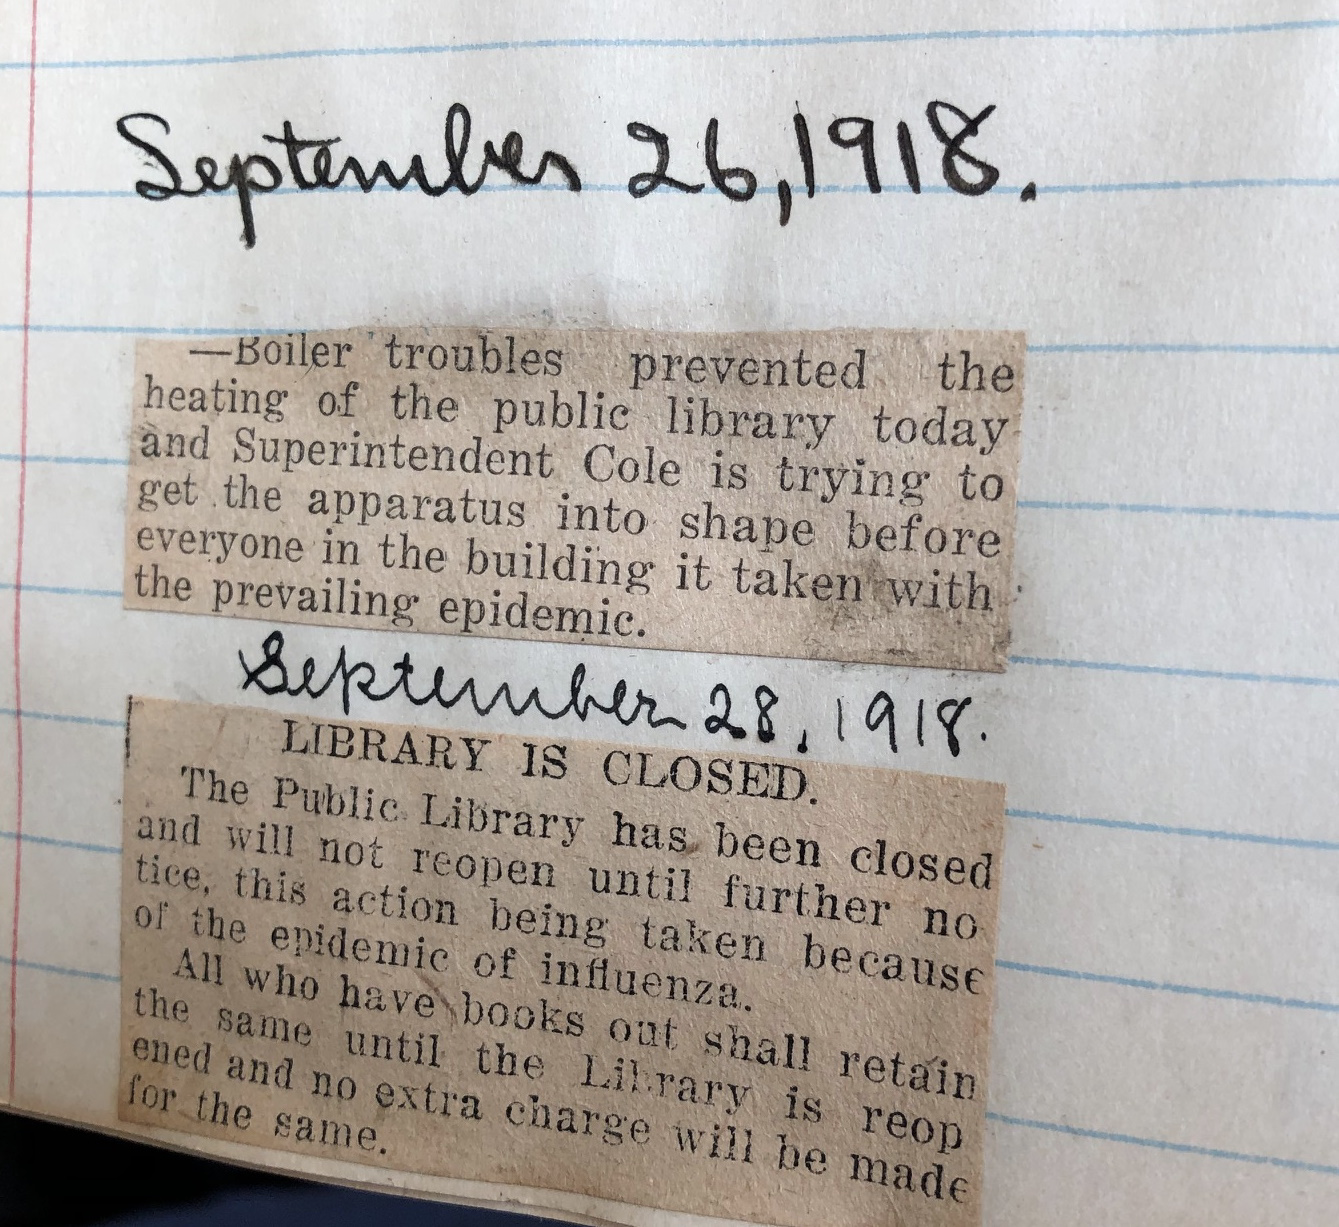 Image of scrapbook page showing newspaper clippings from the early days of the 1918 flu.